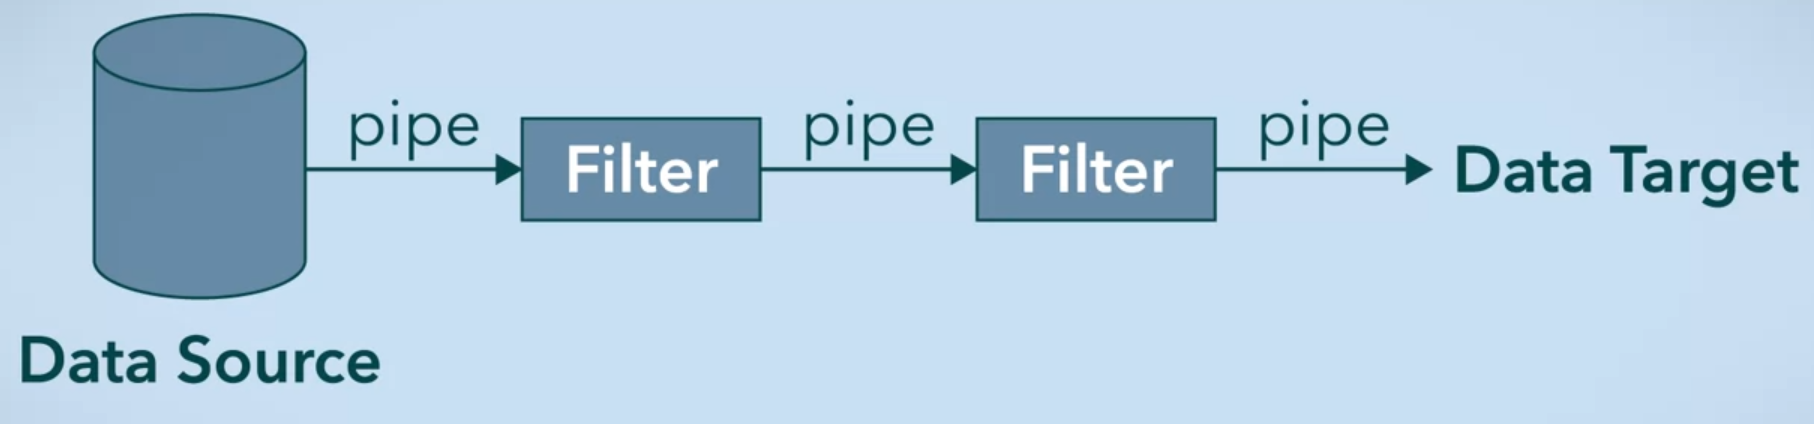 pipe-filter-arch-1.png